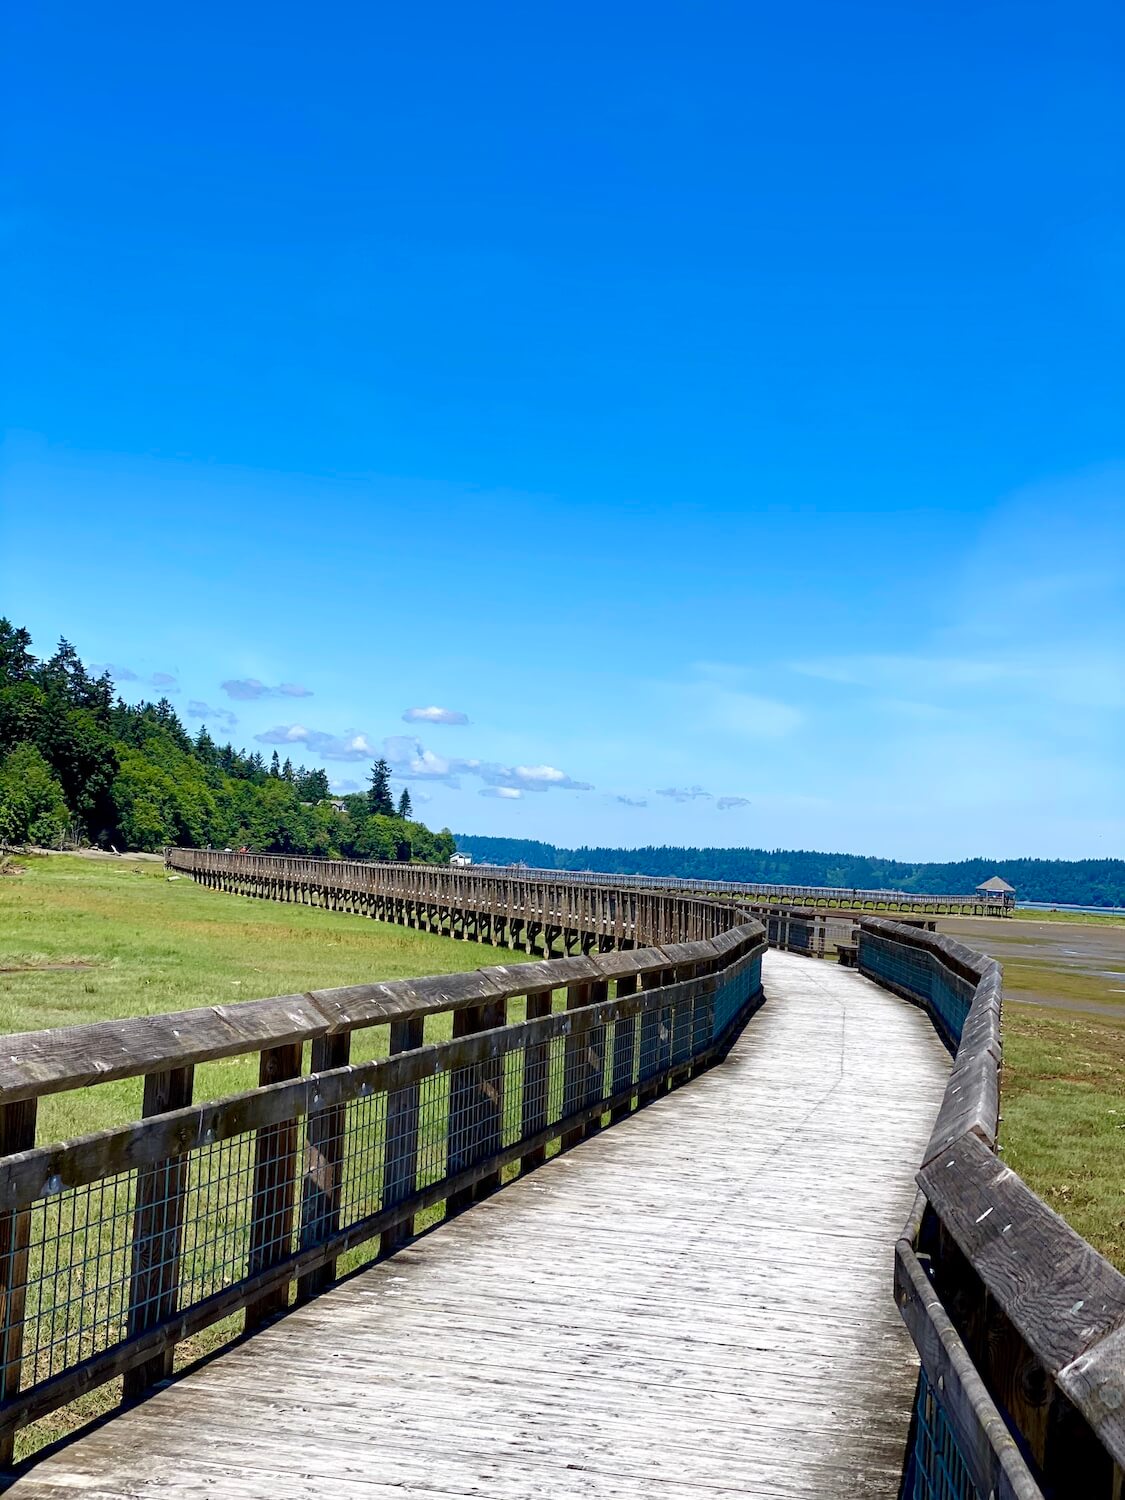 The Nisqually Refuge has a long boardwalk that winds out over the tidal flats to a gazebo, barely seen in this photo at the very end. The grass is bright green and sky blue.